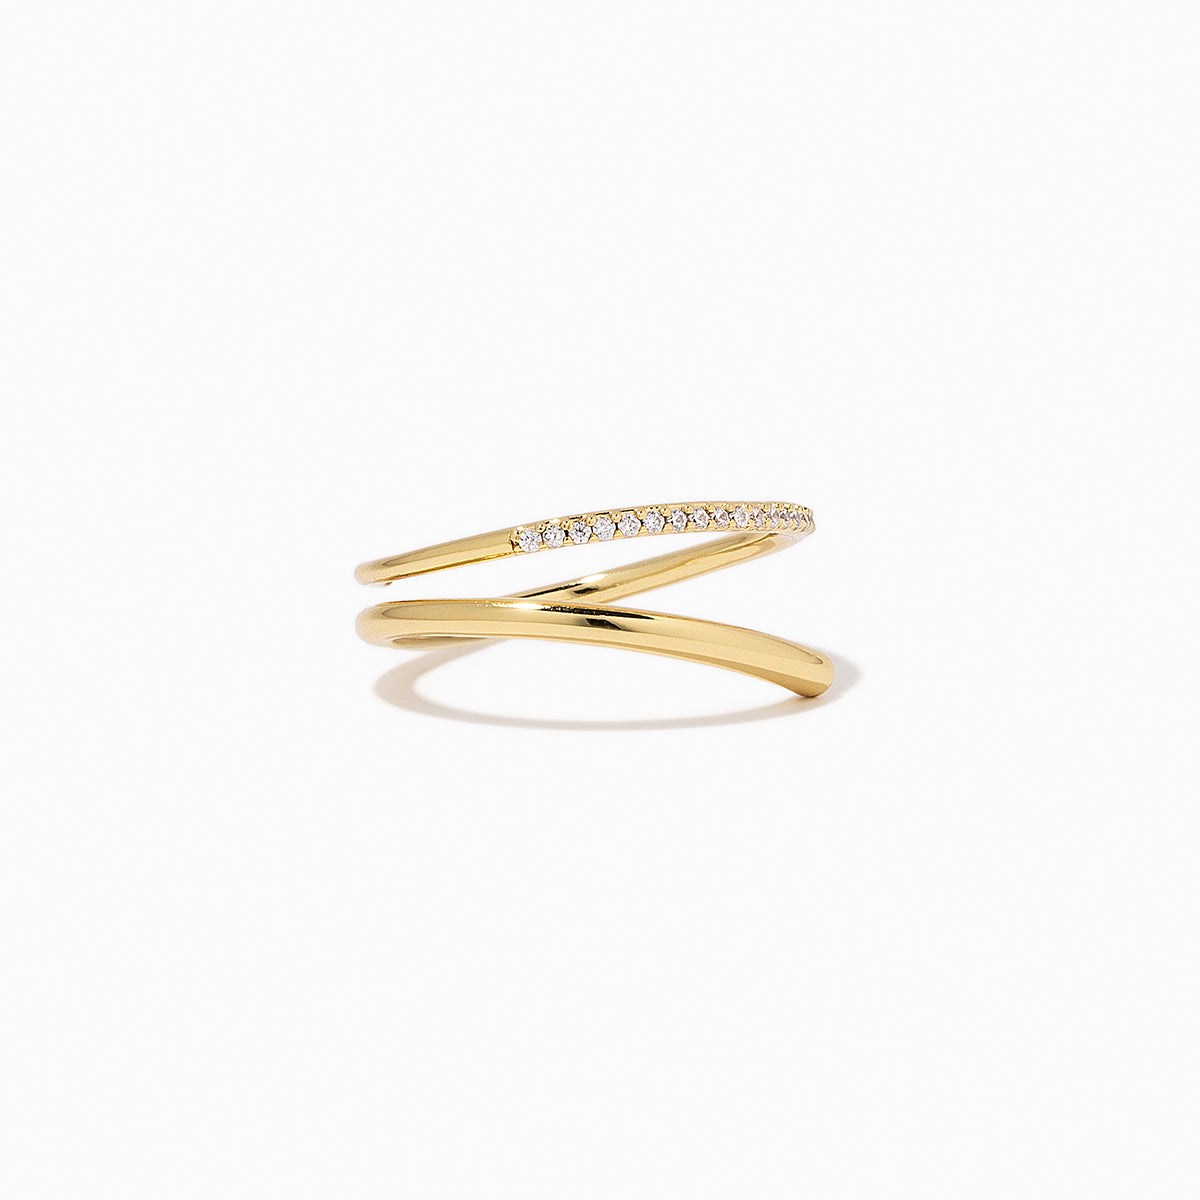 Mixed Metal Chunky Bold Ring in Size 5 - Gold and Silver | Women's Jewelry by Uncommon James